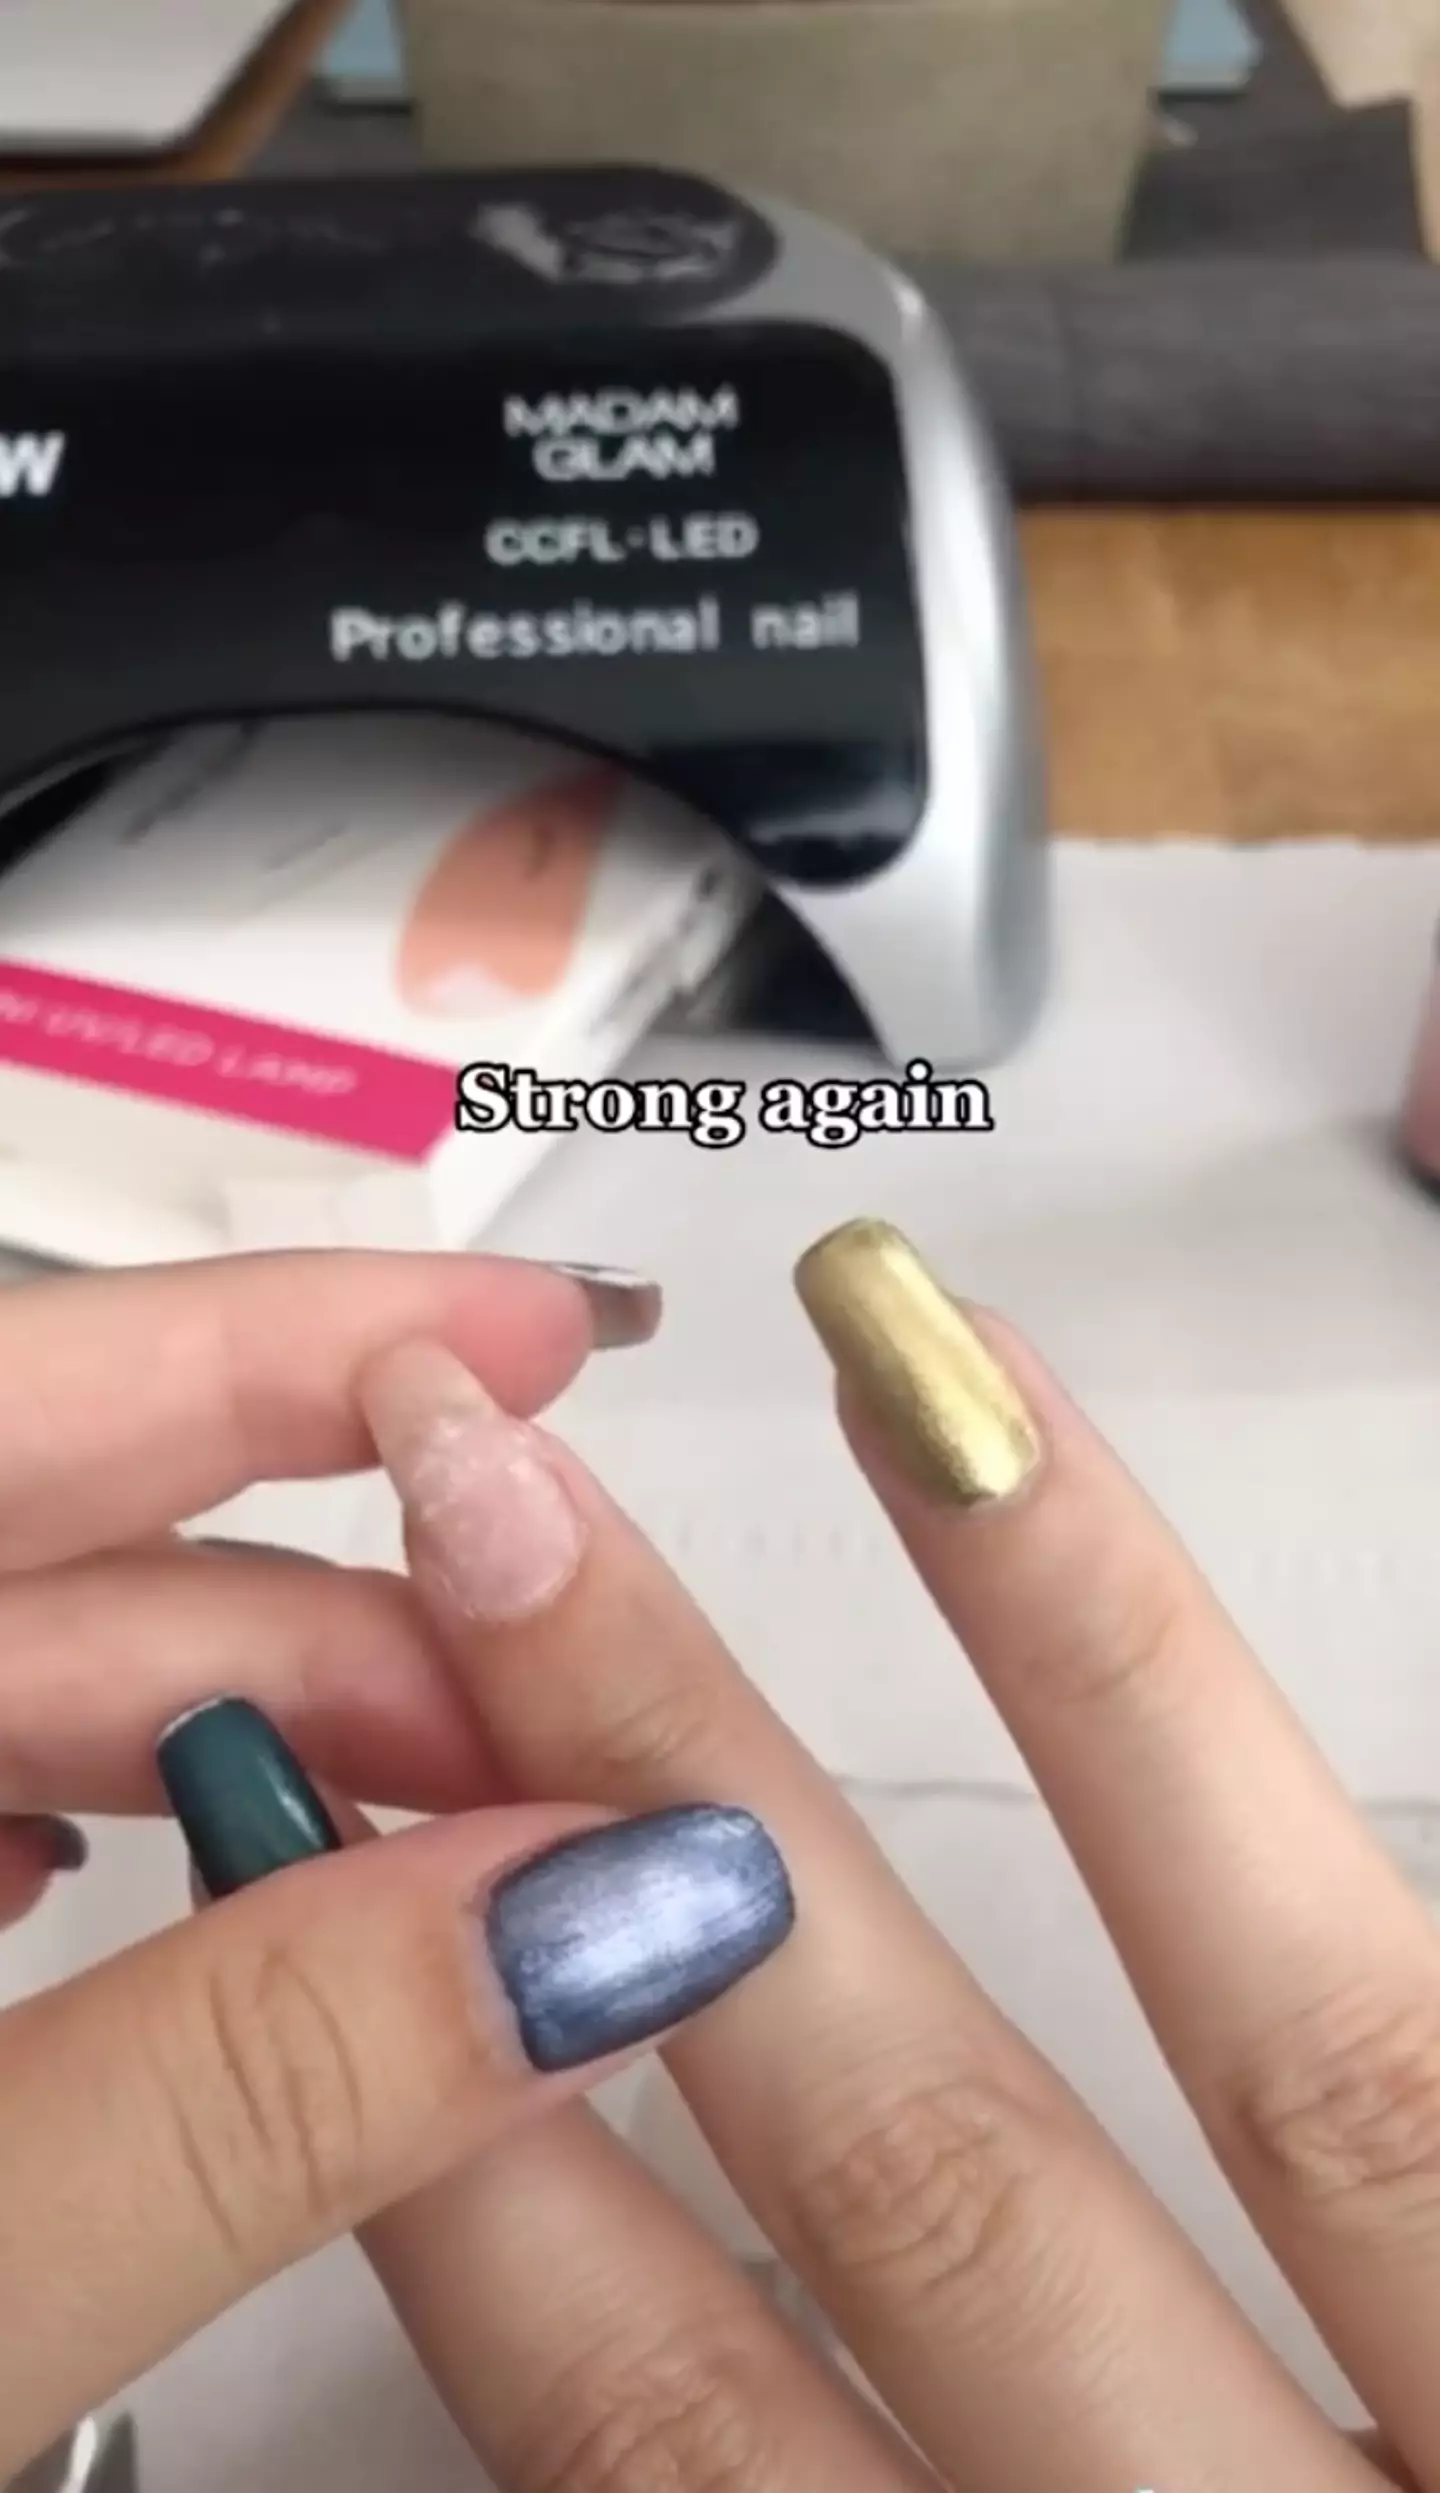 It's a simple way to make your nails strong again (